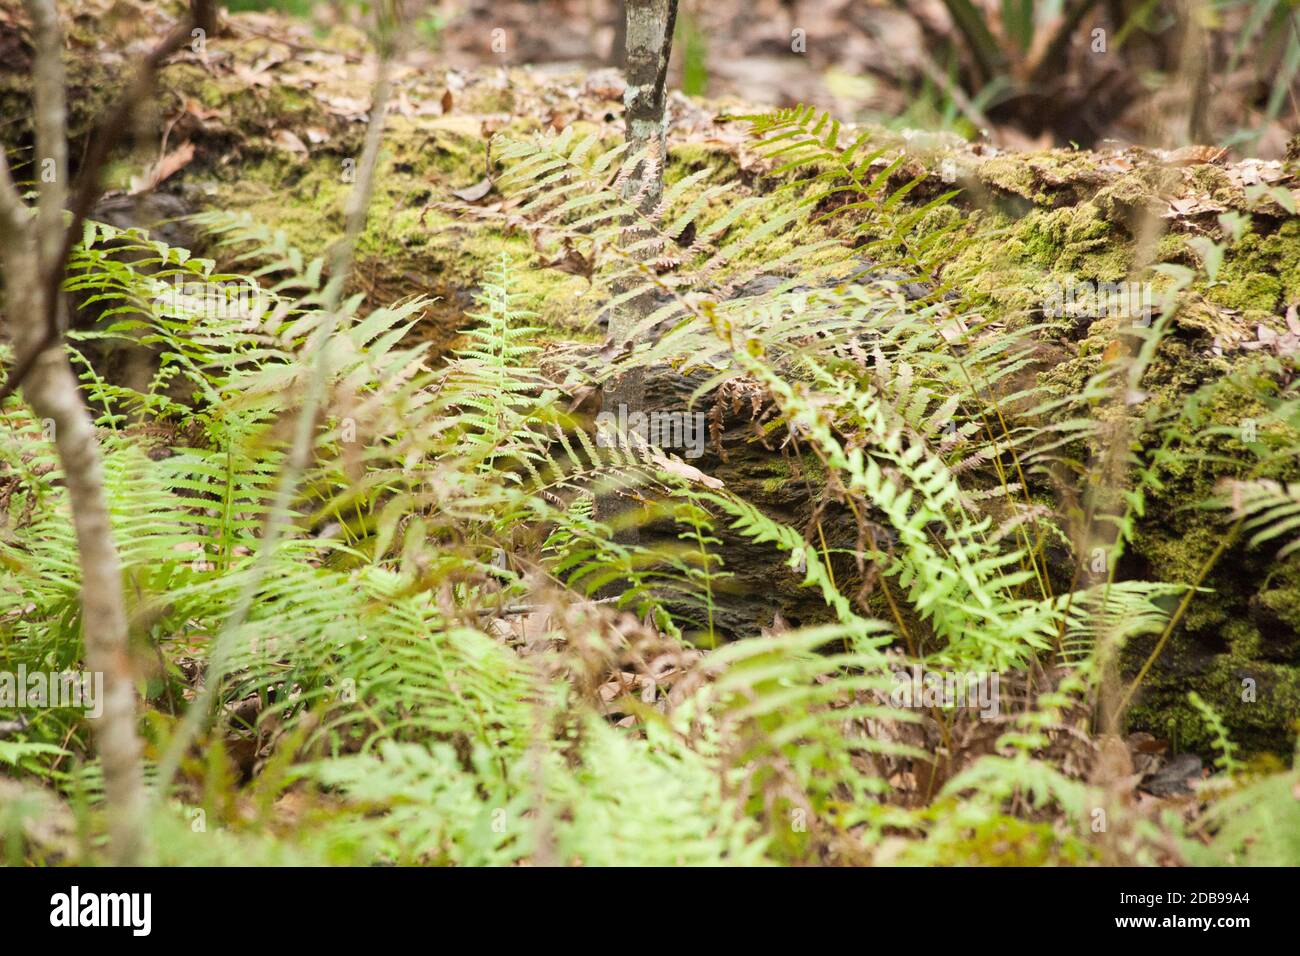 Fern growing outdoors Stock Photo